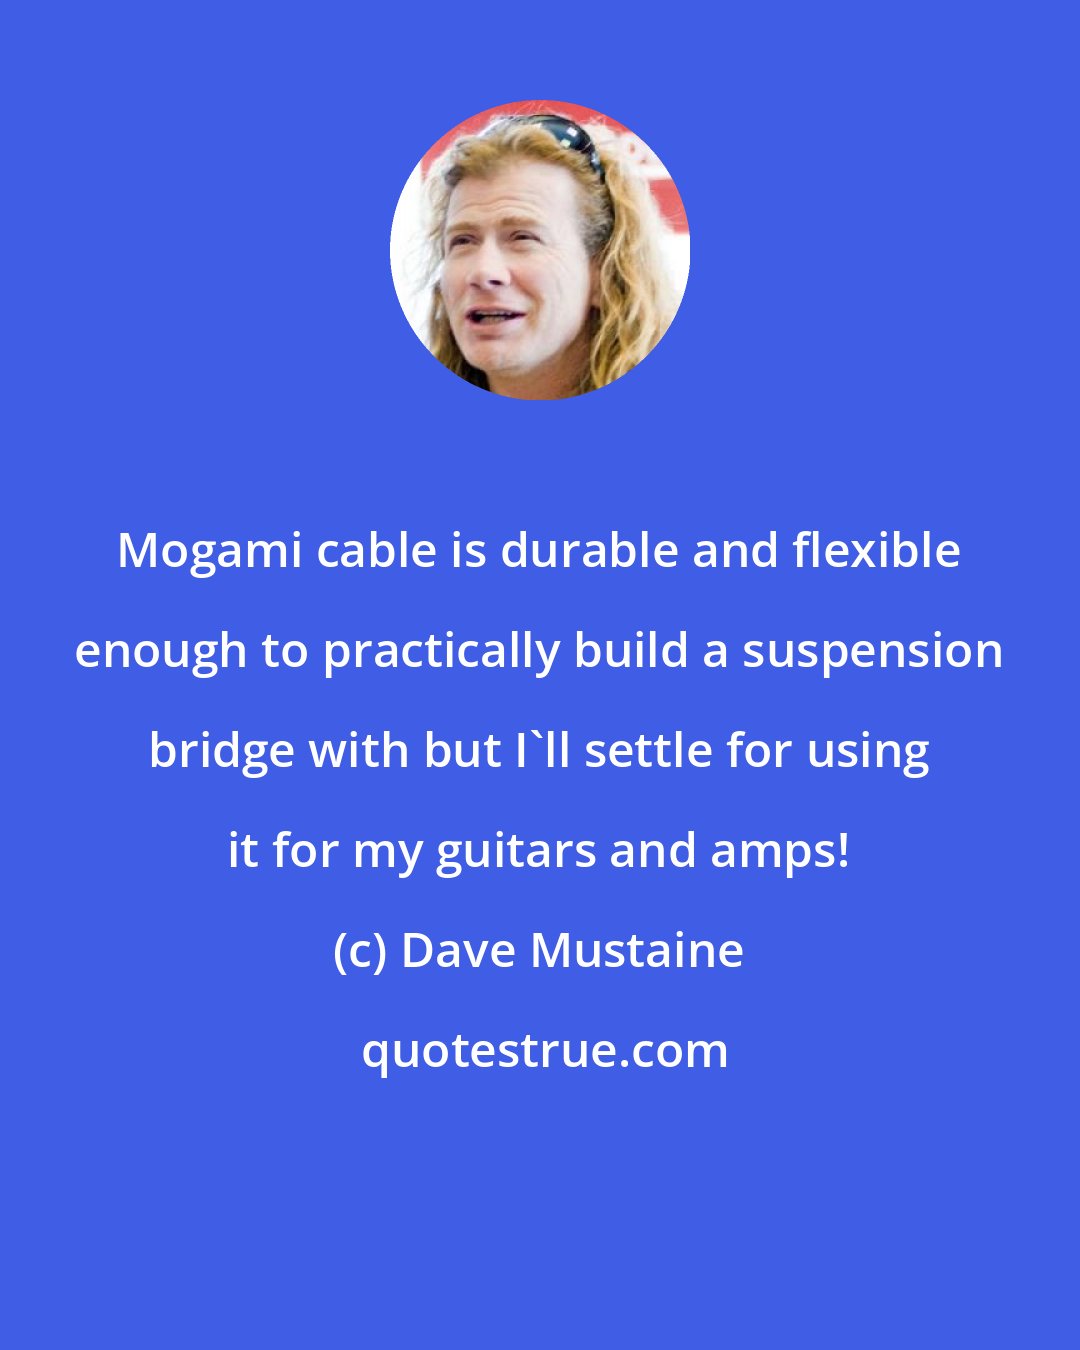 Dave Mustaine: Mogami cable is durable and flexible enough to practically build a suspension bridge with but I'll settle for using it for my guitars and amps!